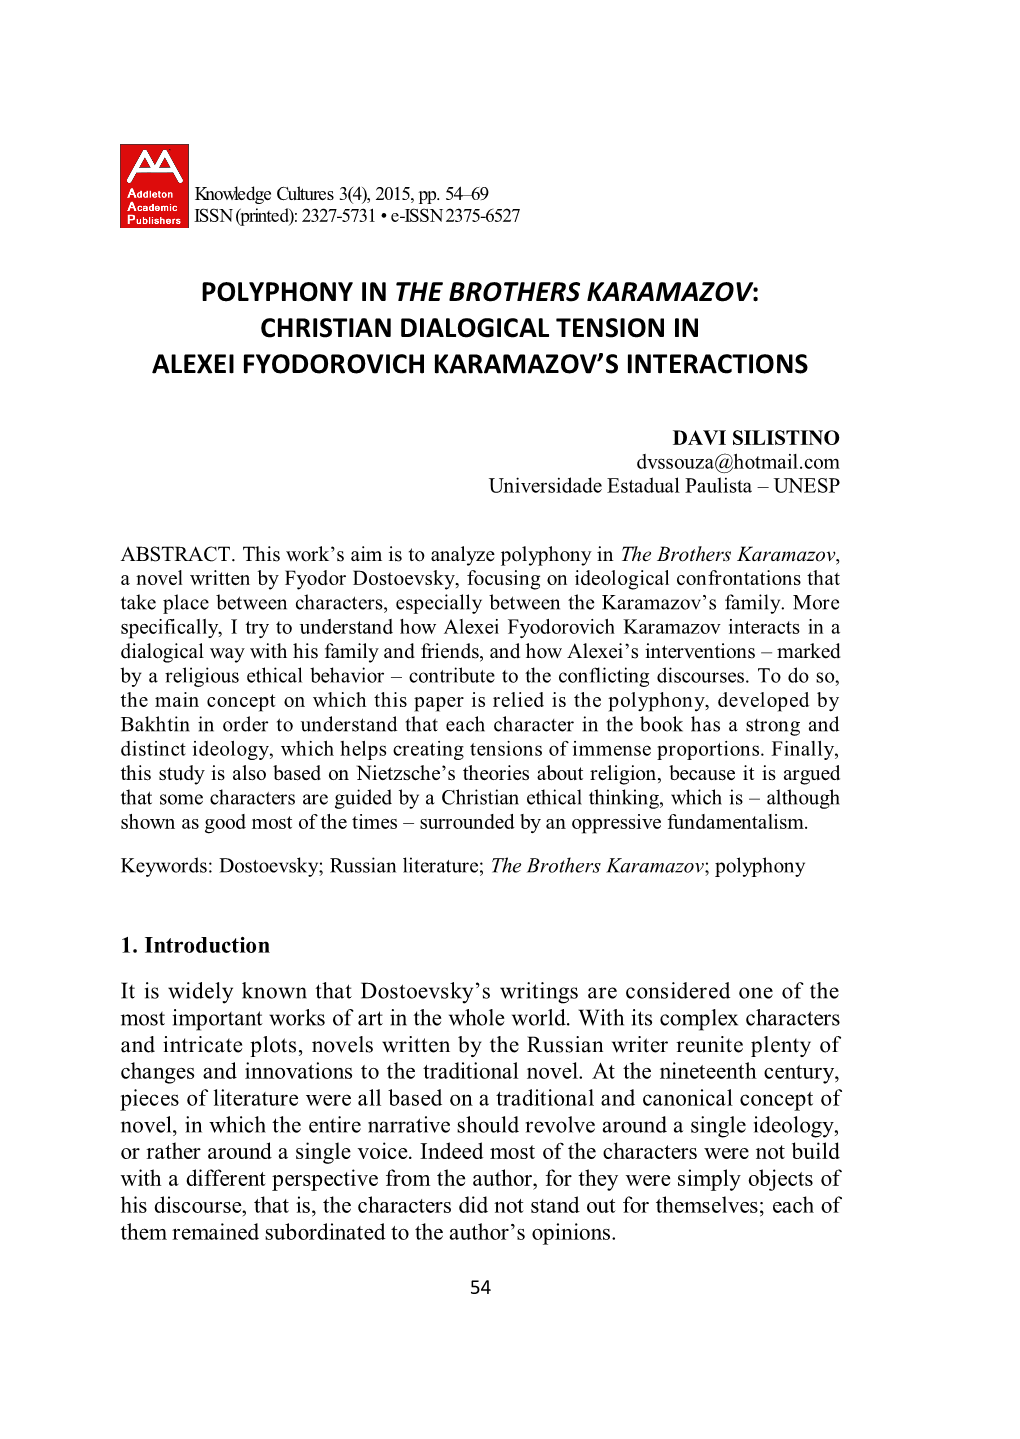 Polyphony in the Brothers Karamazov: Christian Dialogical Tension in Alexei Fyodorovich Karamazov’S Interactions